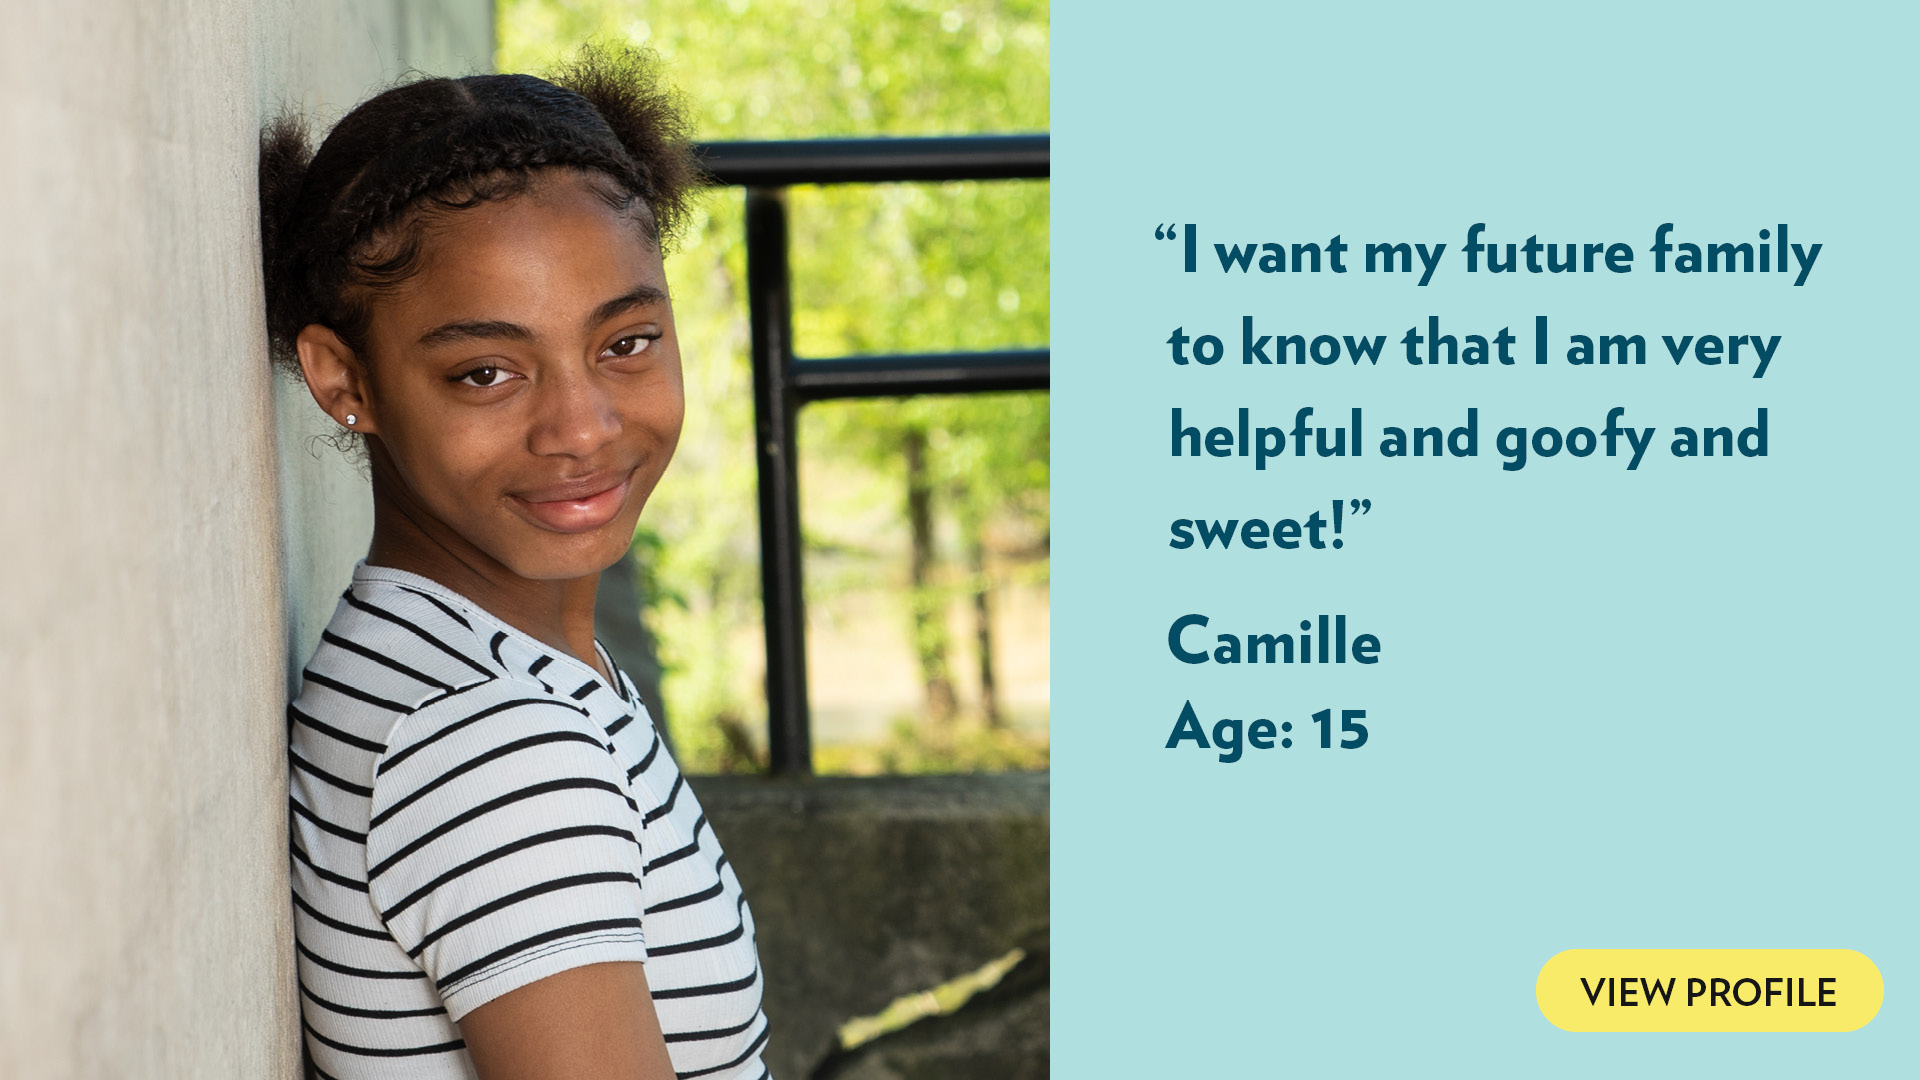 I want my future family to know that I am very helpful and goofy and sweet! Camille, age 15. View profile.